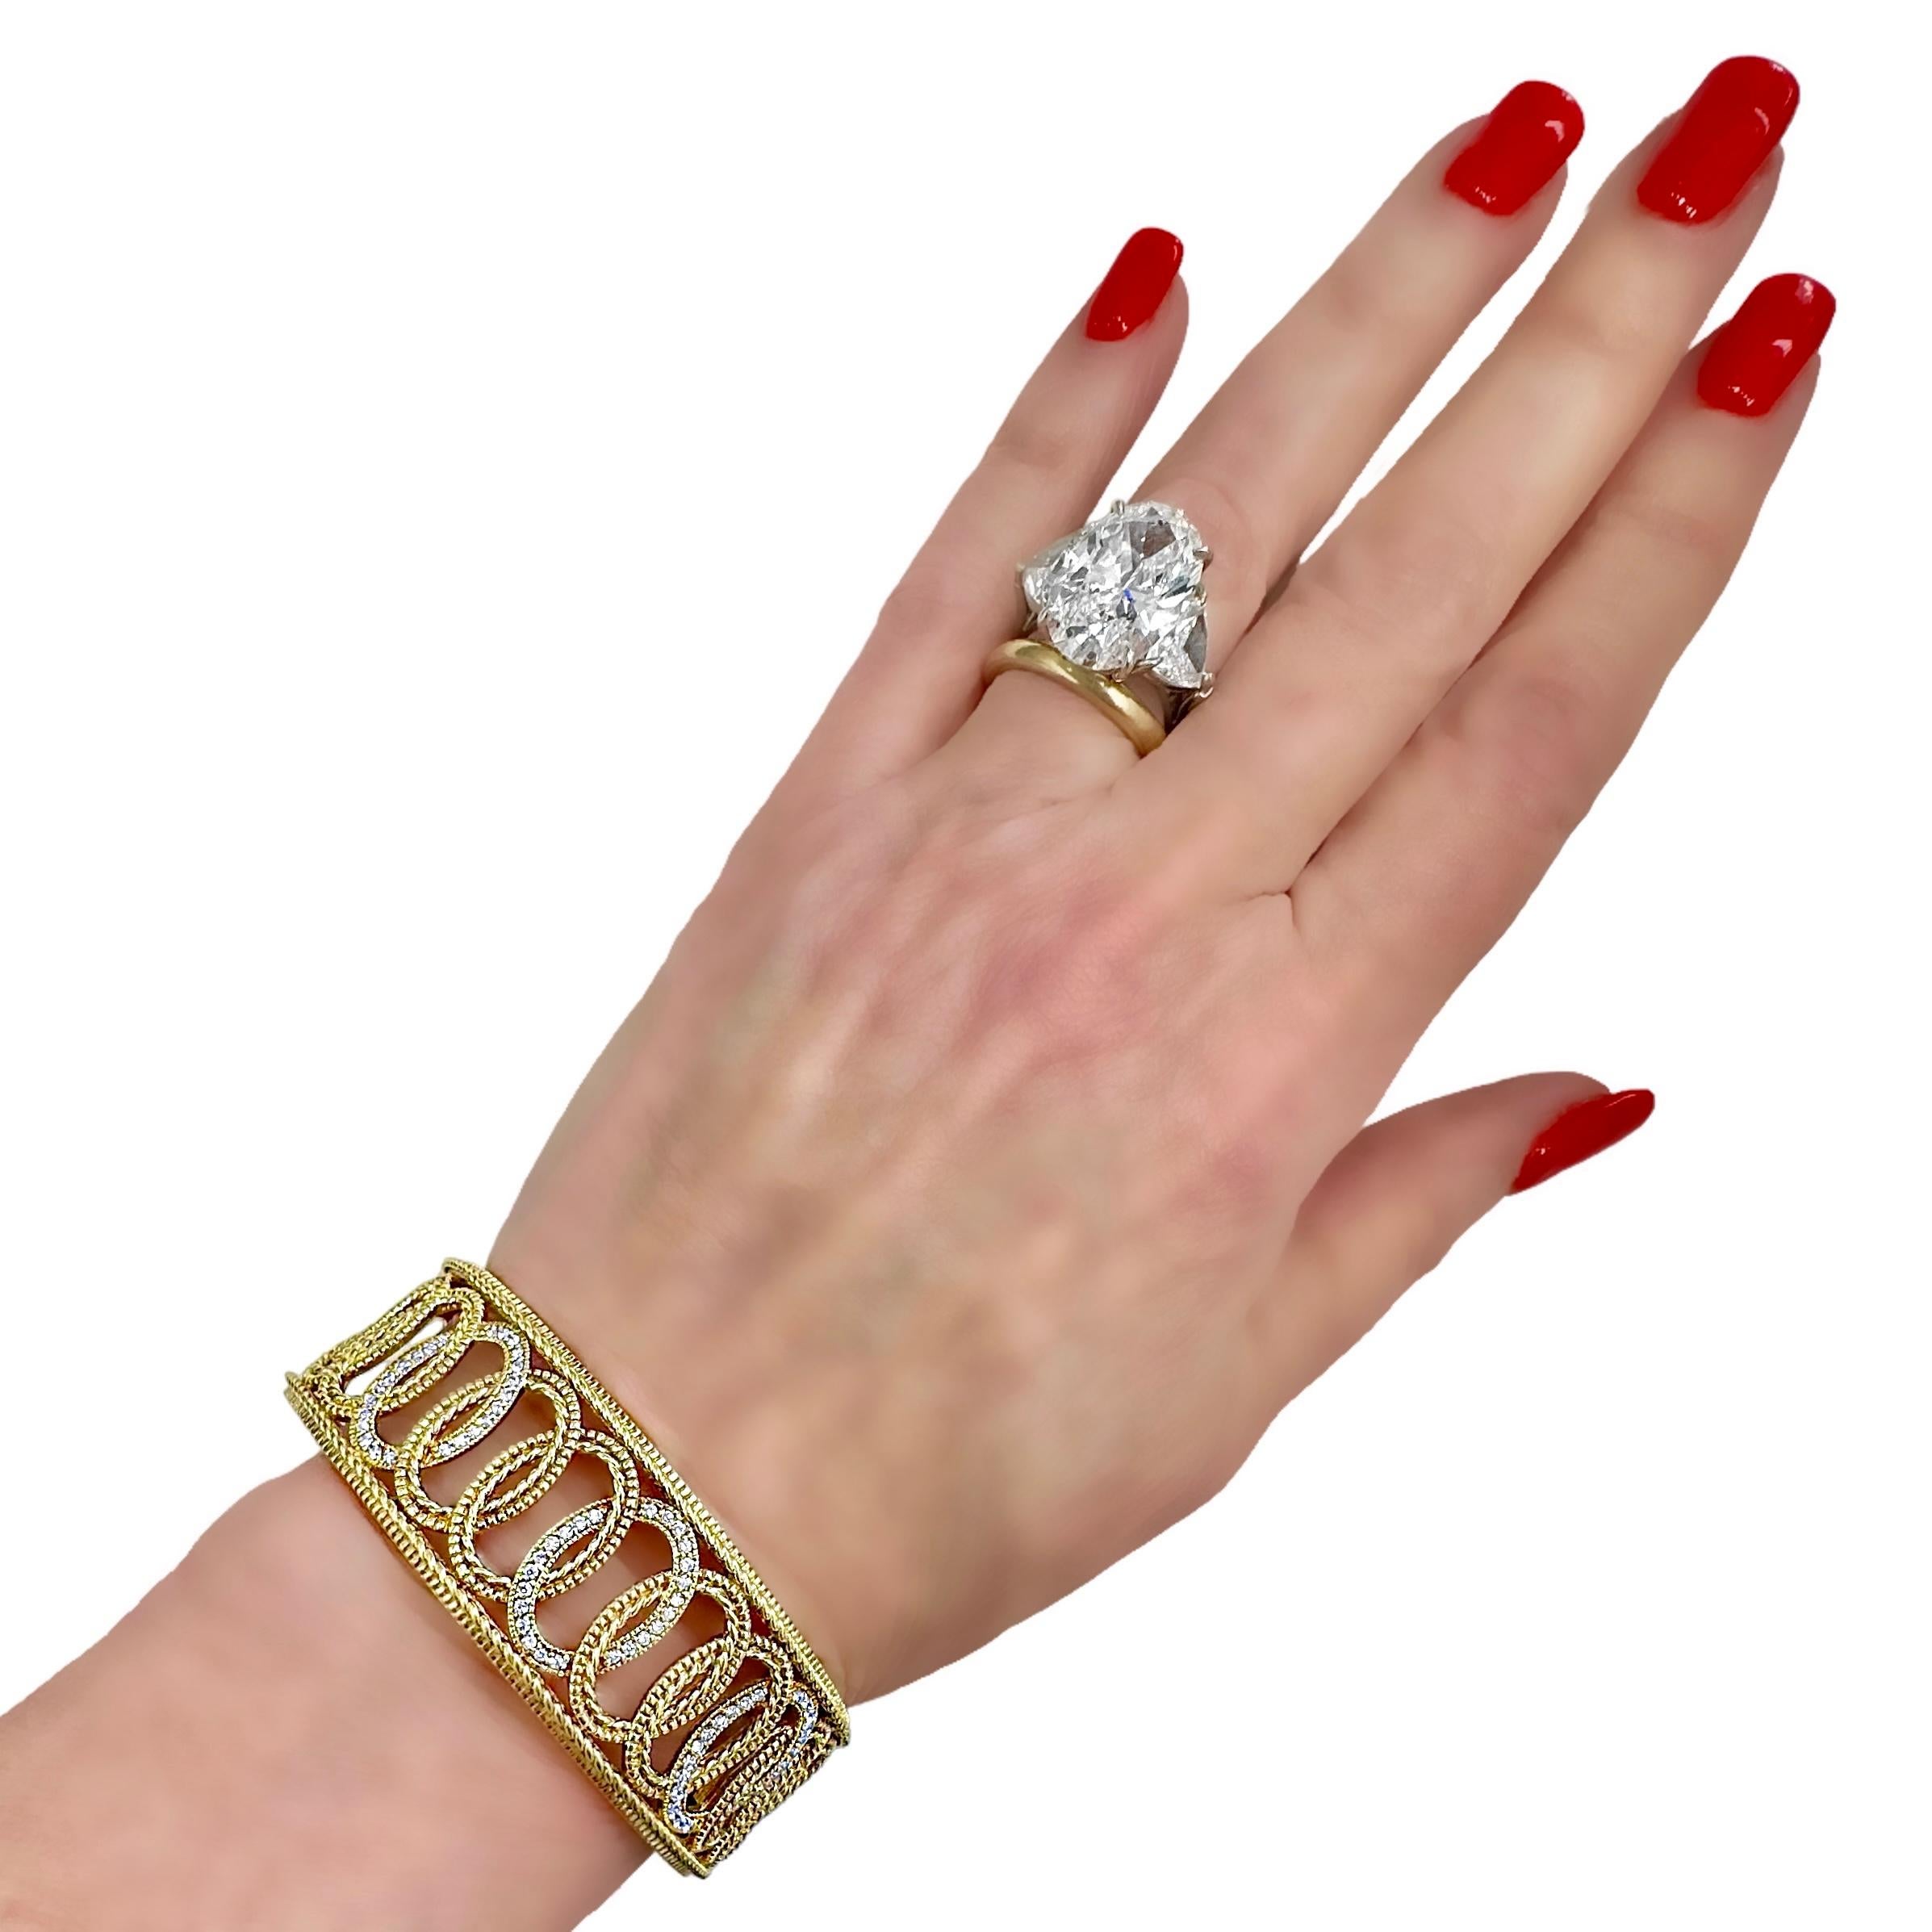 Casual Judith Ripka 18k Gold Hinged, Cuff Bracelet with Diamonds 7/8 inch Wide  7